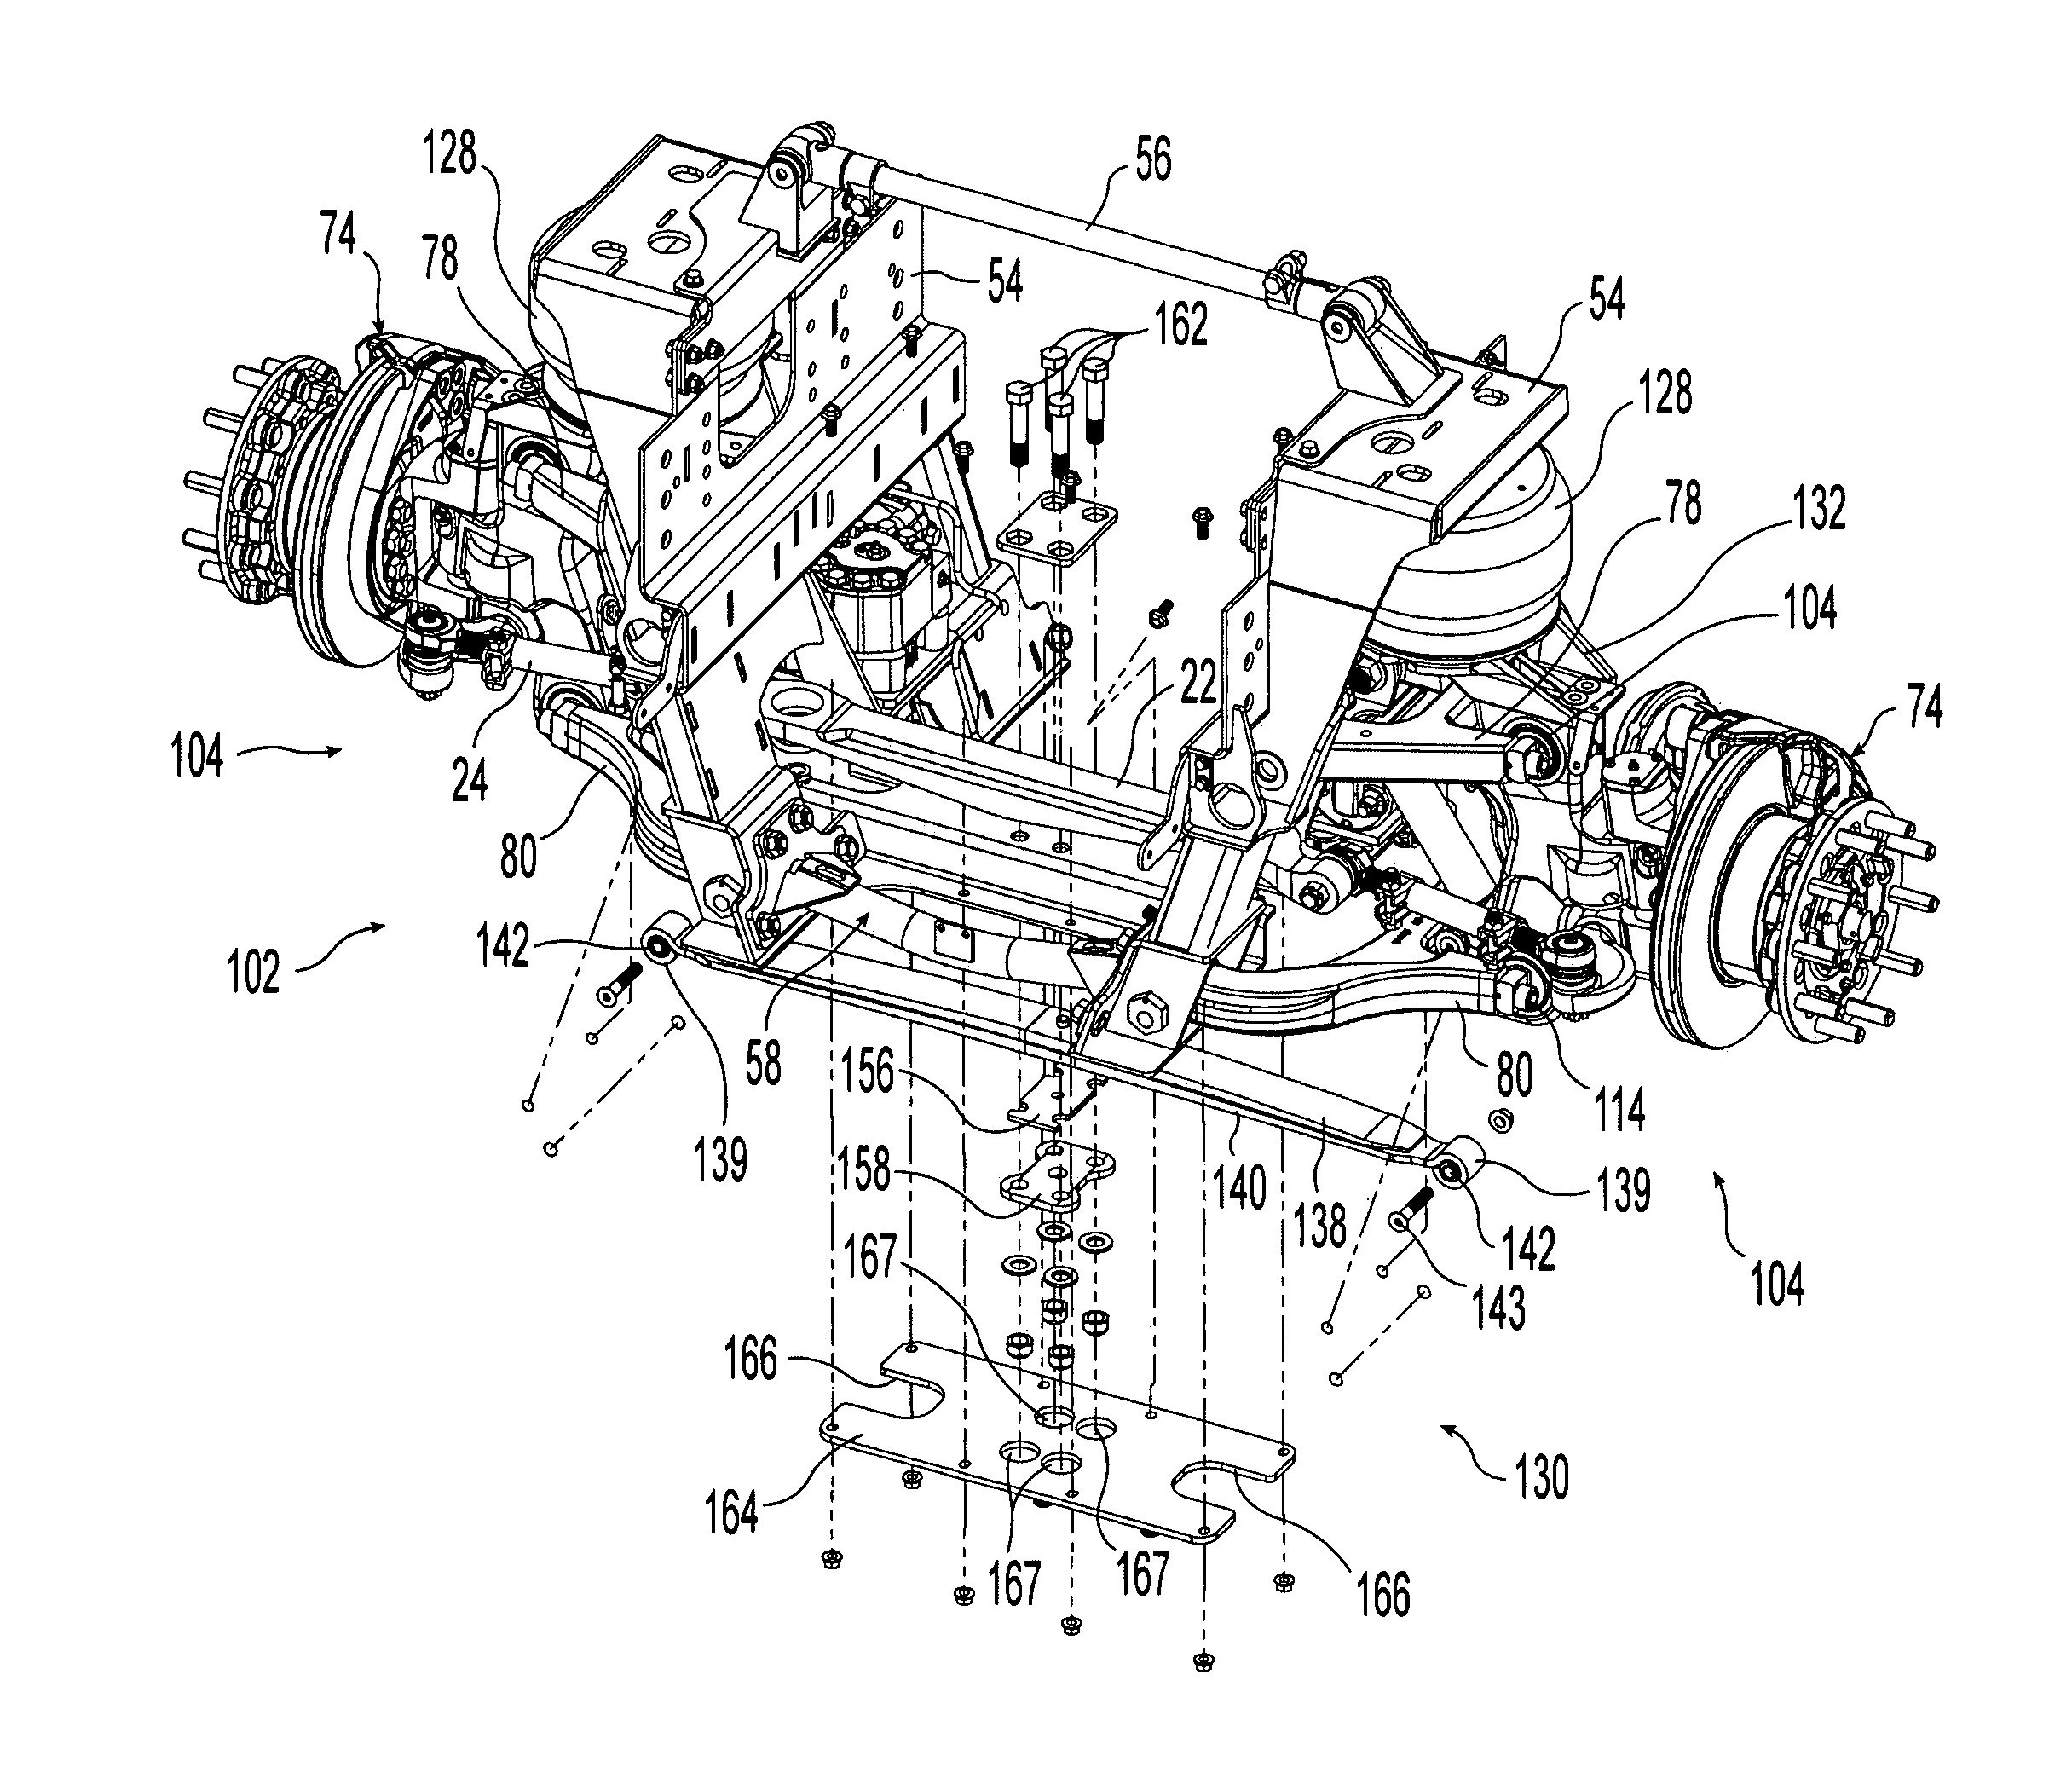 Independent suspension and steering assembly